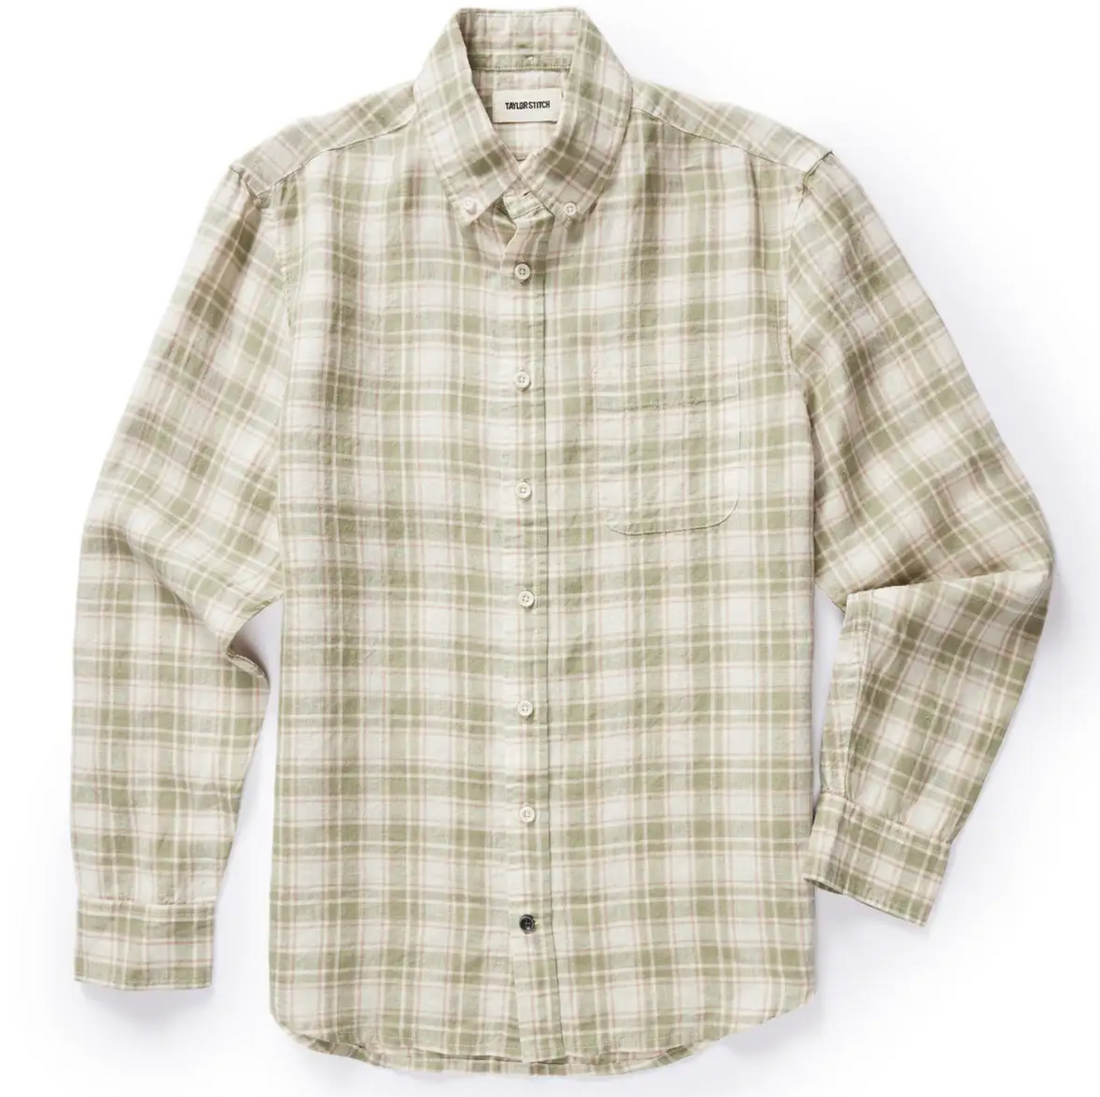 Taylor Stitch - The Jack in Palm Plaid Linen